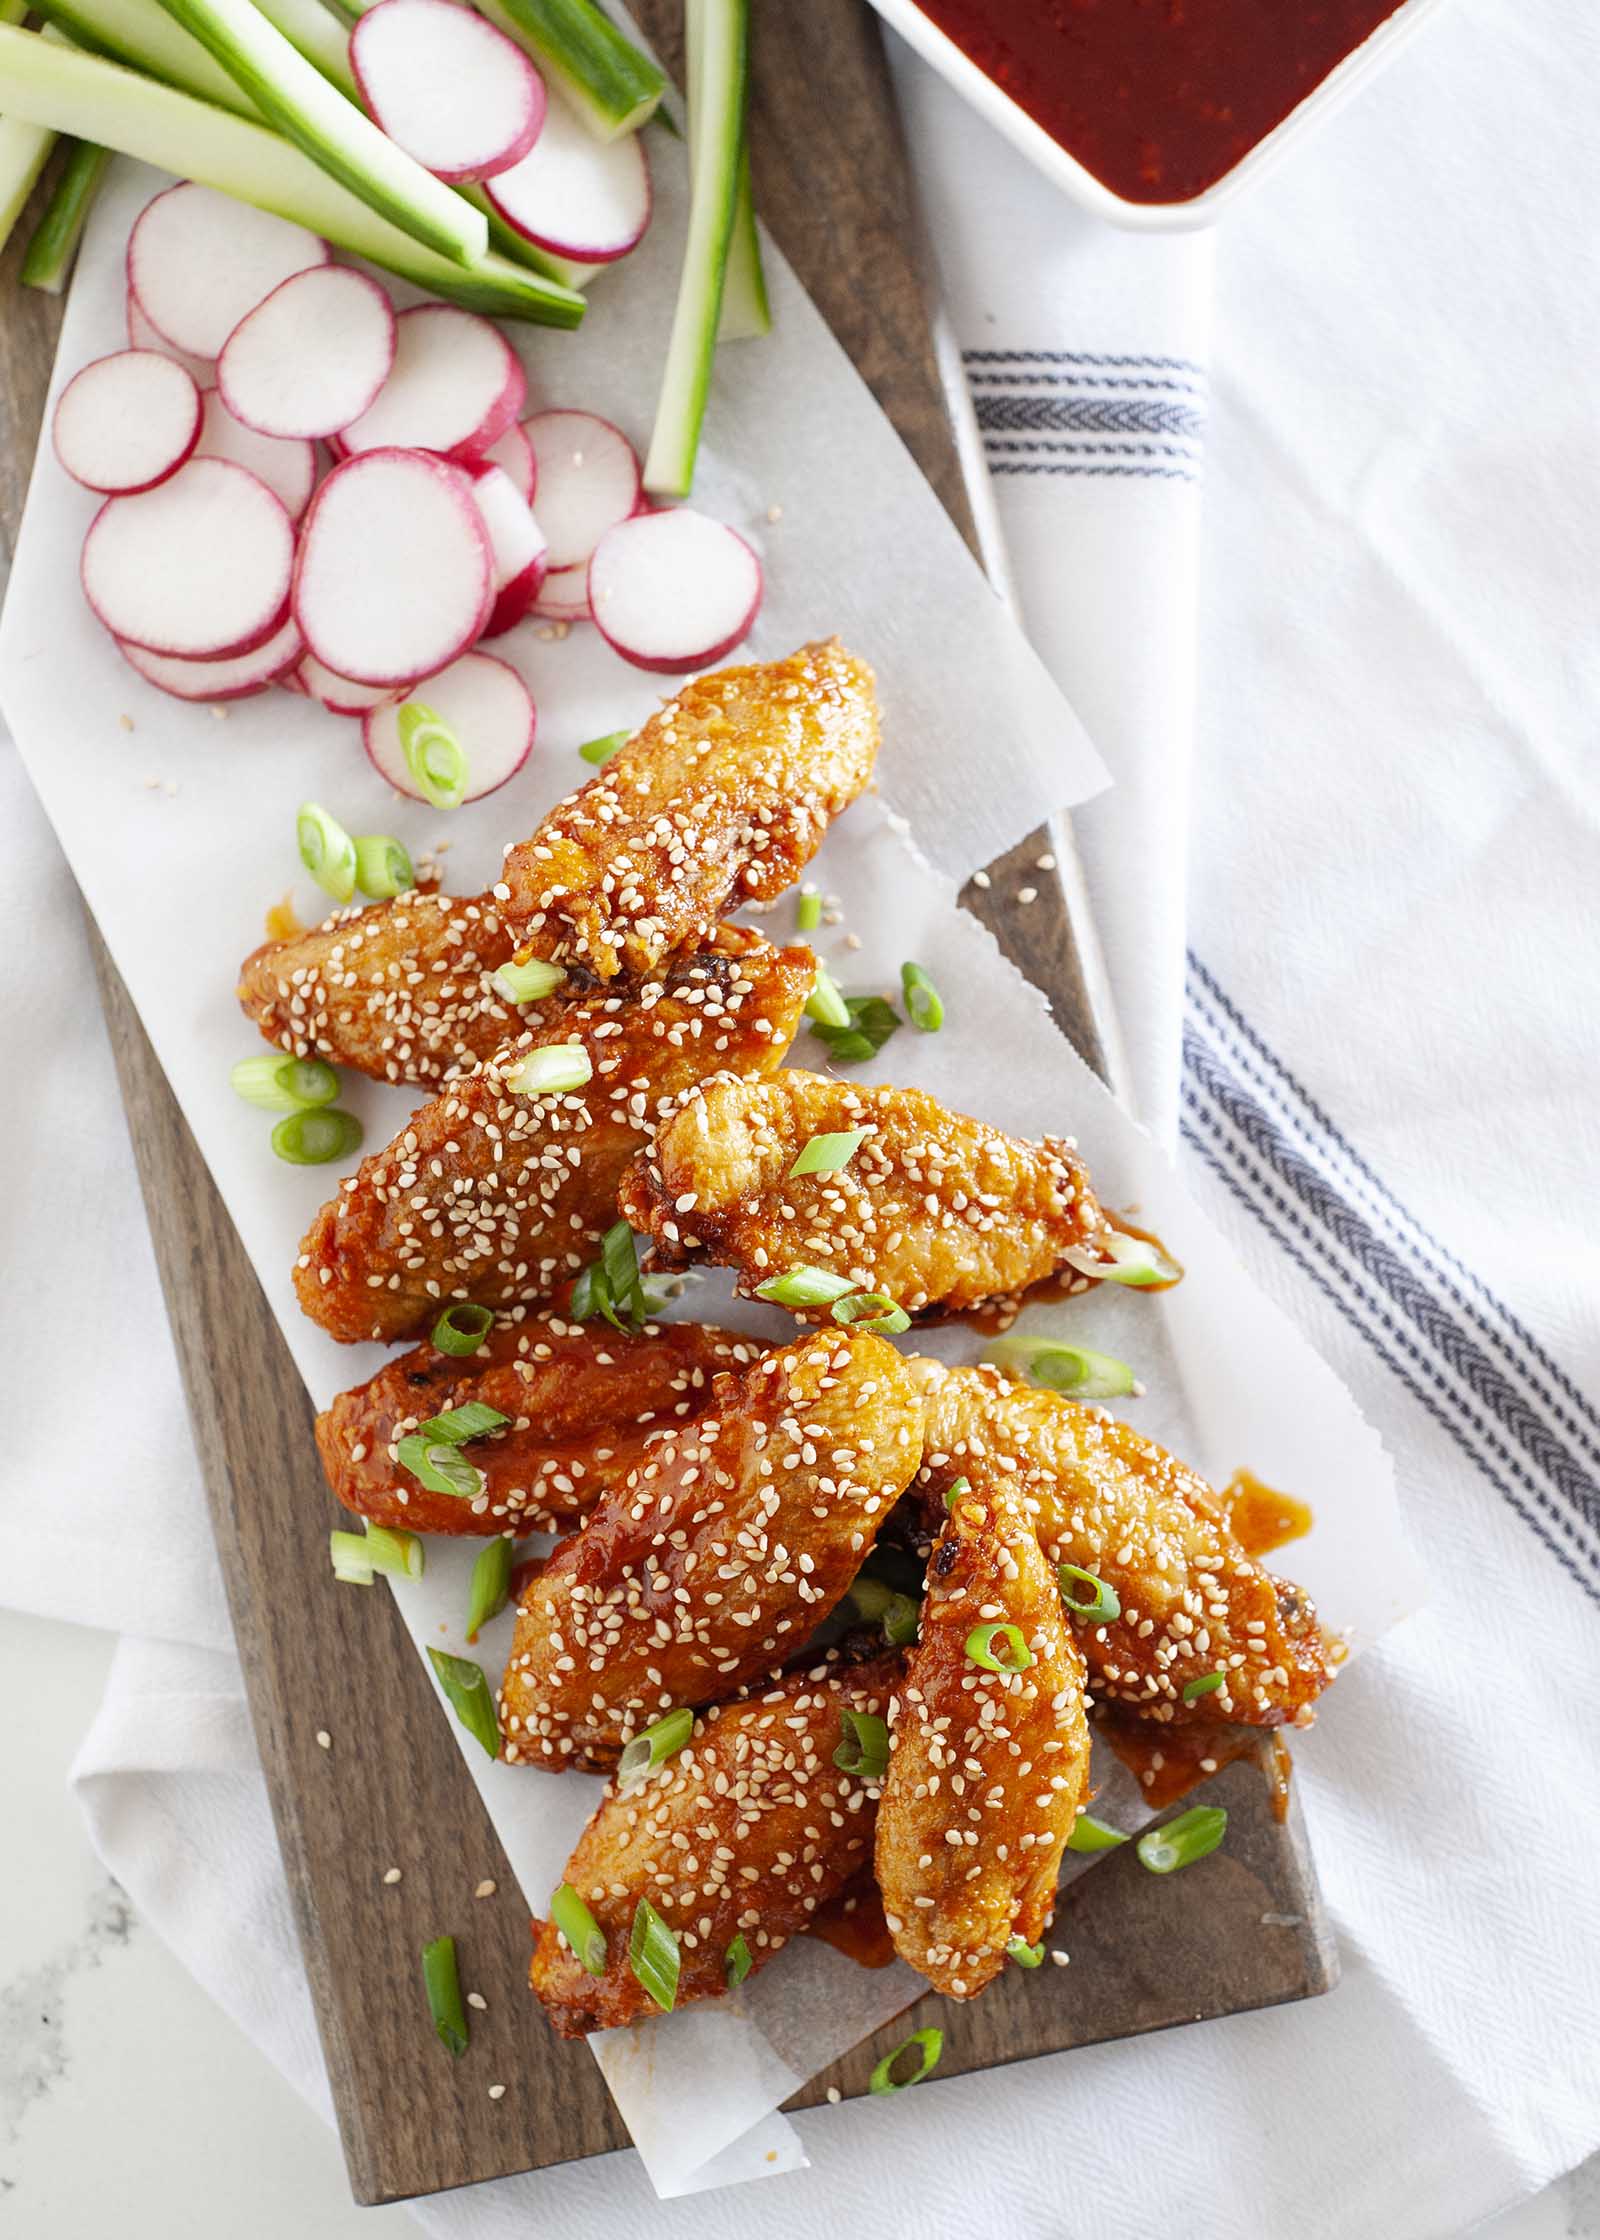 Crispy Day Air Fryer Chicken Wings with Gochujang Sauce on rectangle board sprinkled with sesame seeds with radishes, scallions and sesame dipping sauces in white dishes nearby.